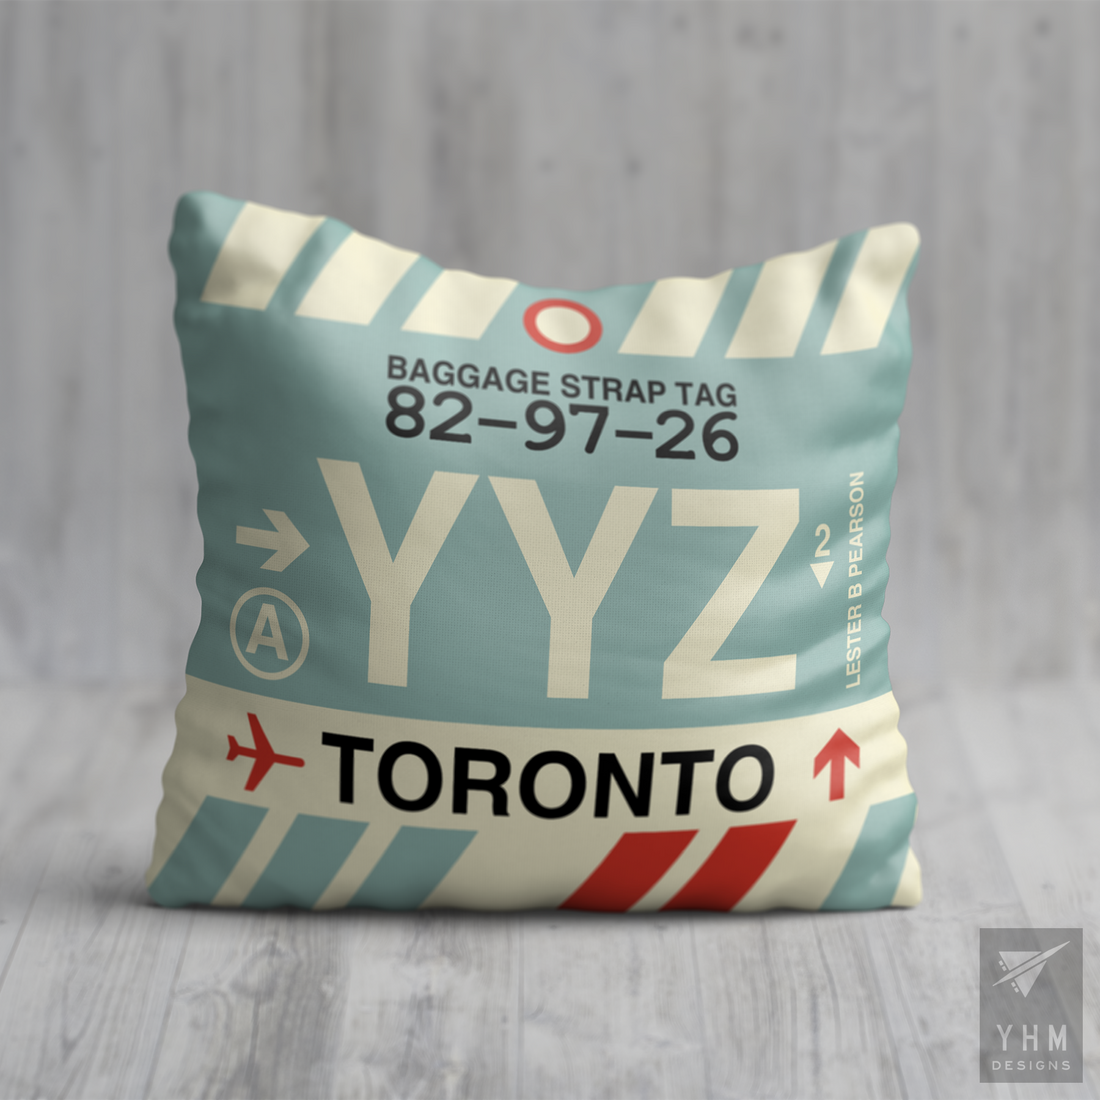 Toronto Gift Ideas • Wall Art & Home Decor Featuring the YYZ Airport Code